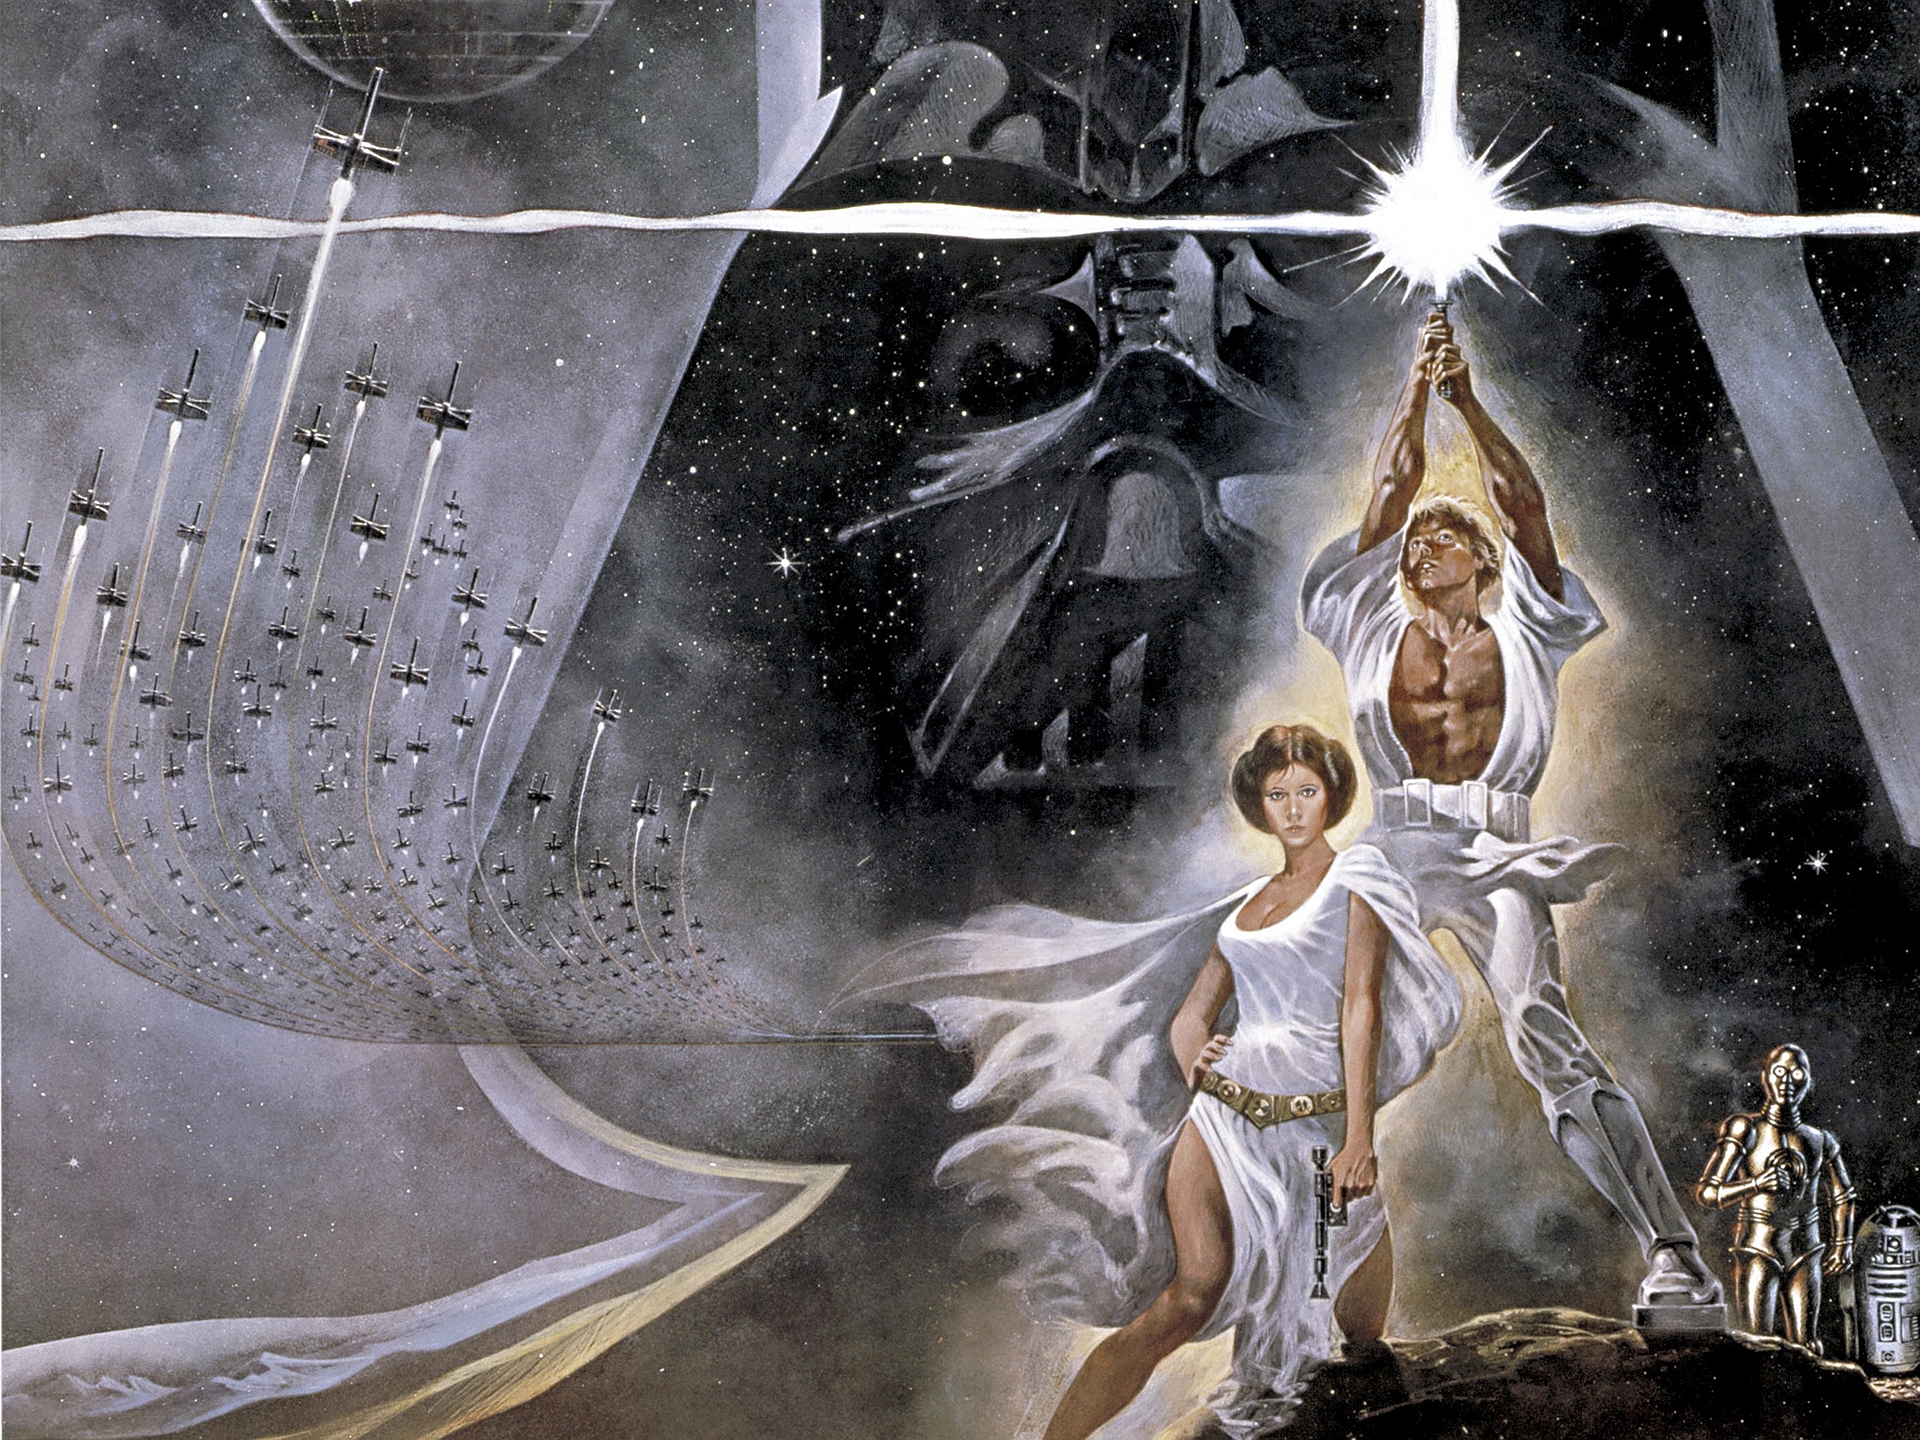 Movie Star Wars Episode IV A New Hope 1920x1440